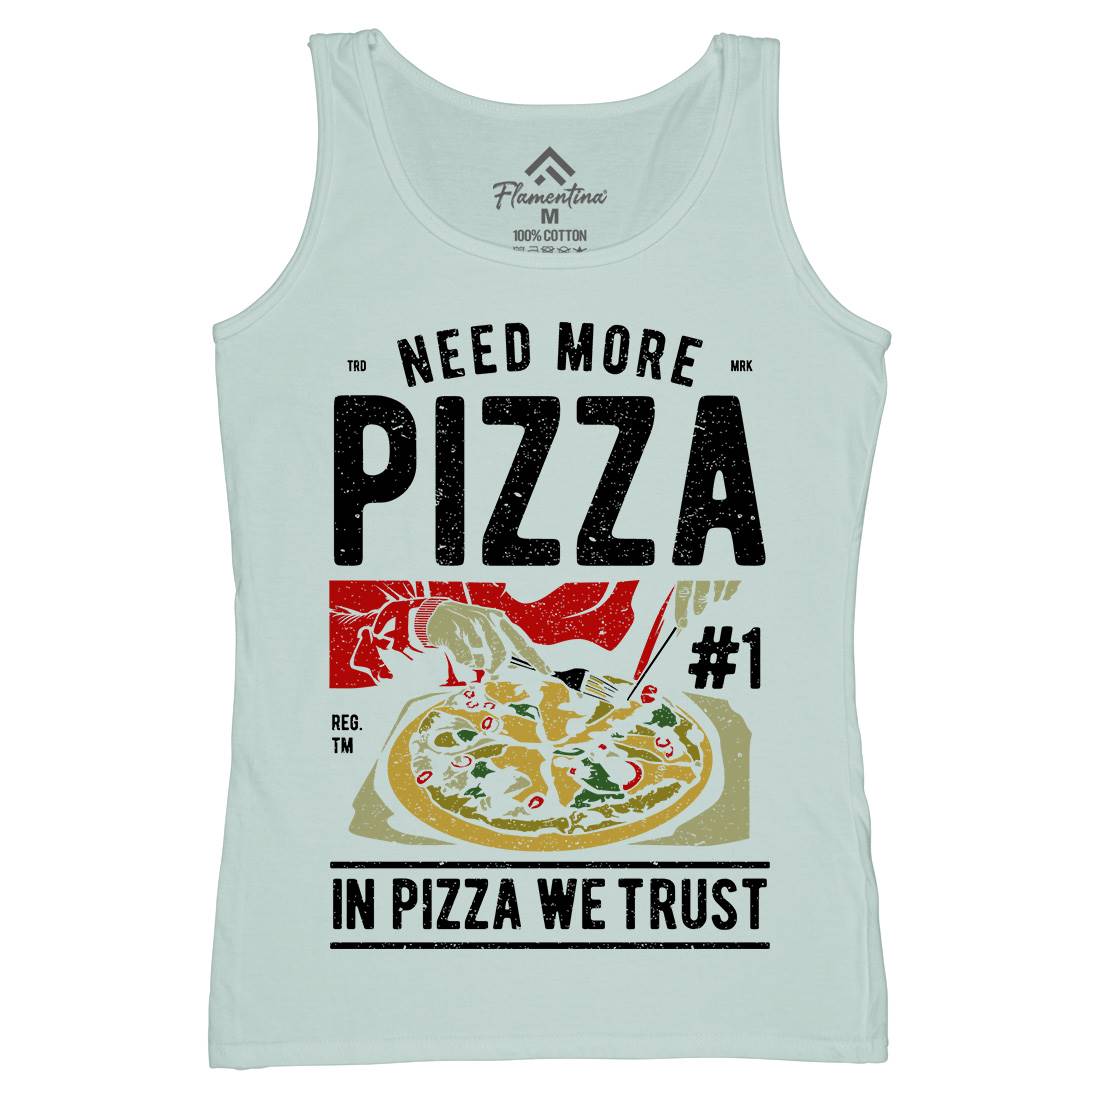 Need More Pizza Womens Organic Tank Top Vest Food A727